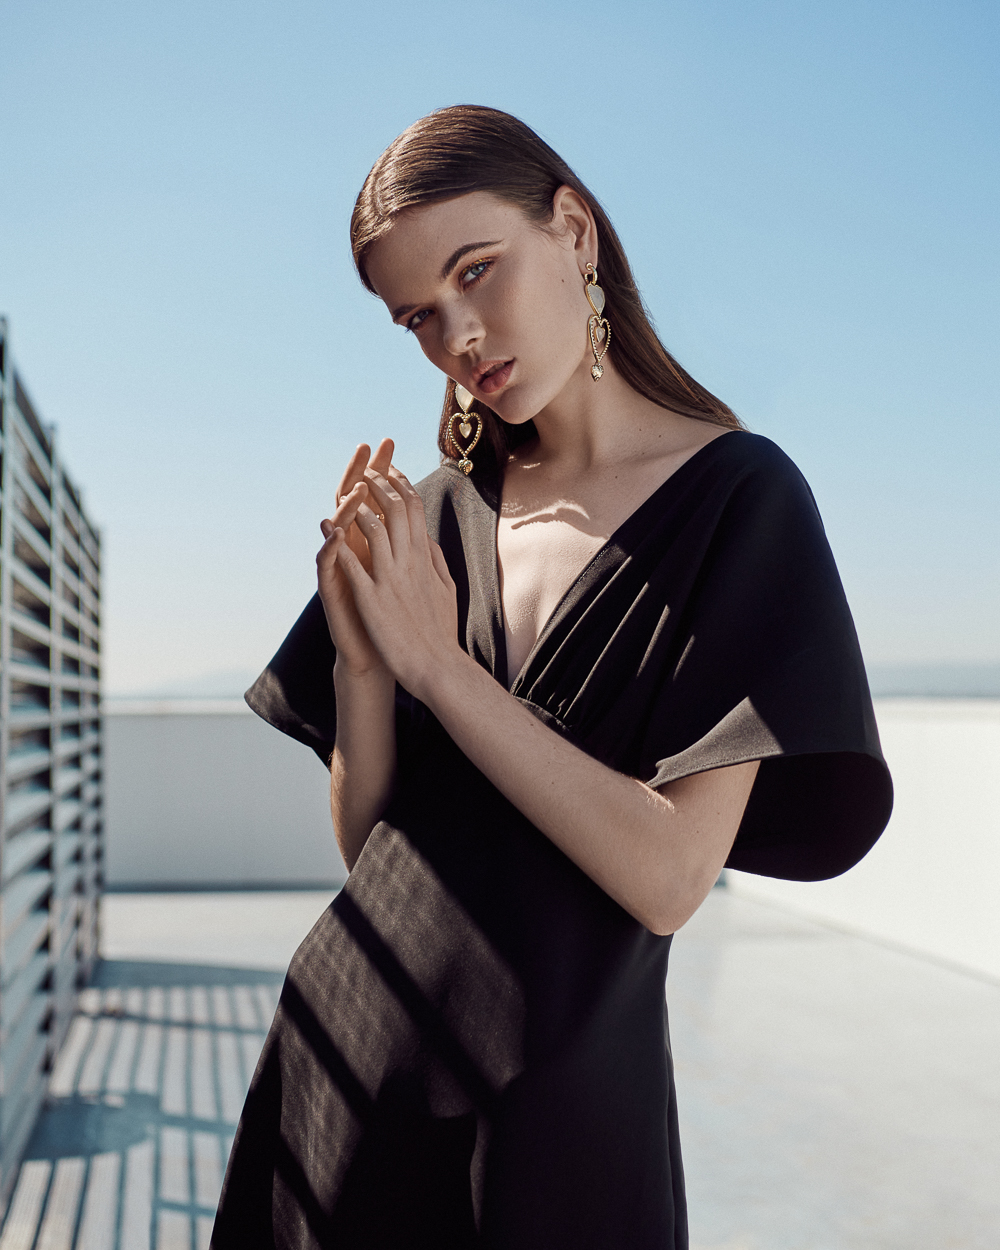 Carmen Rose Exclusively for Fashion Editorials with Hannah Marwick